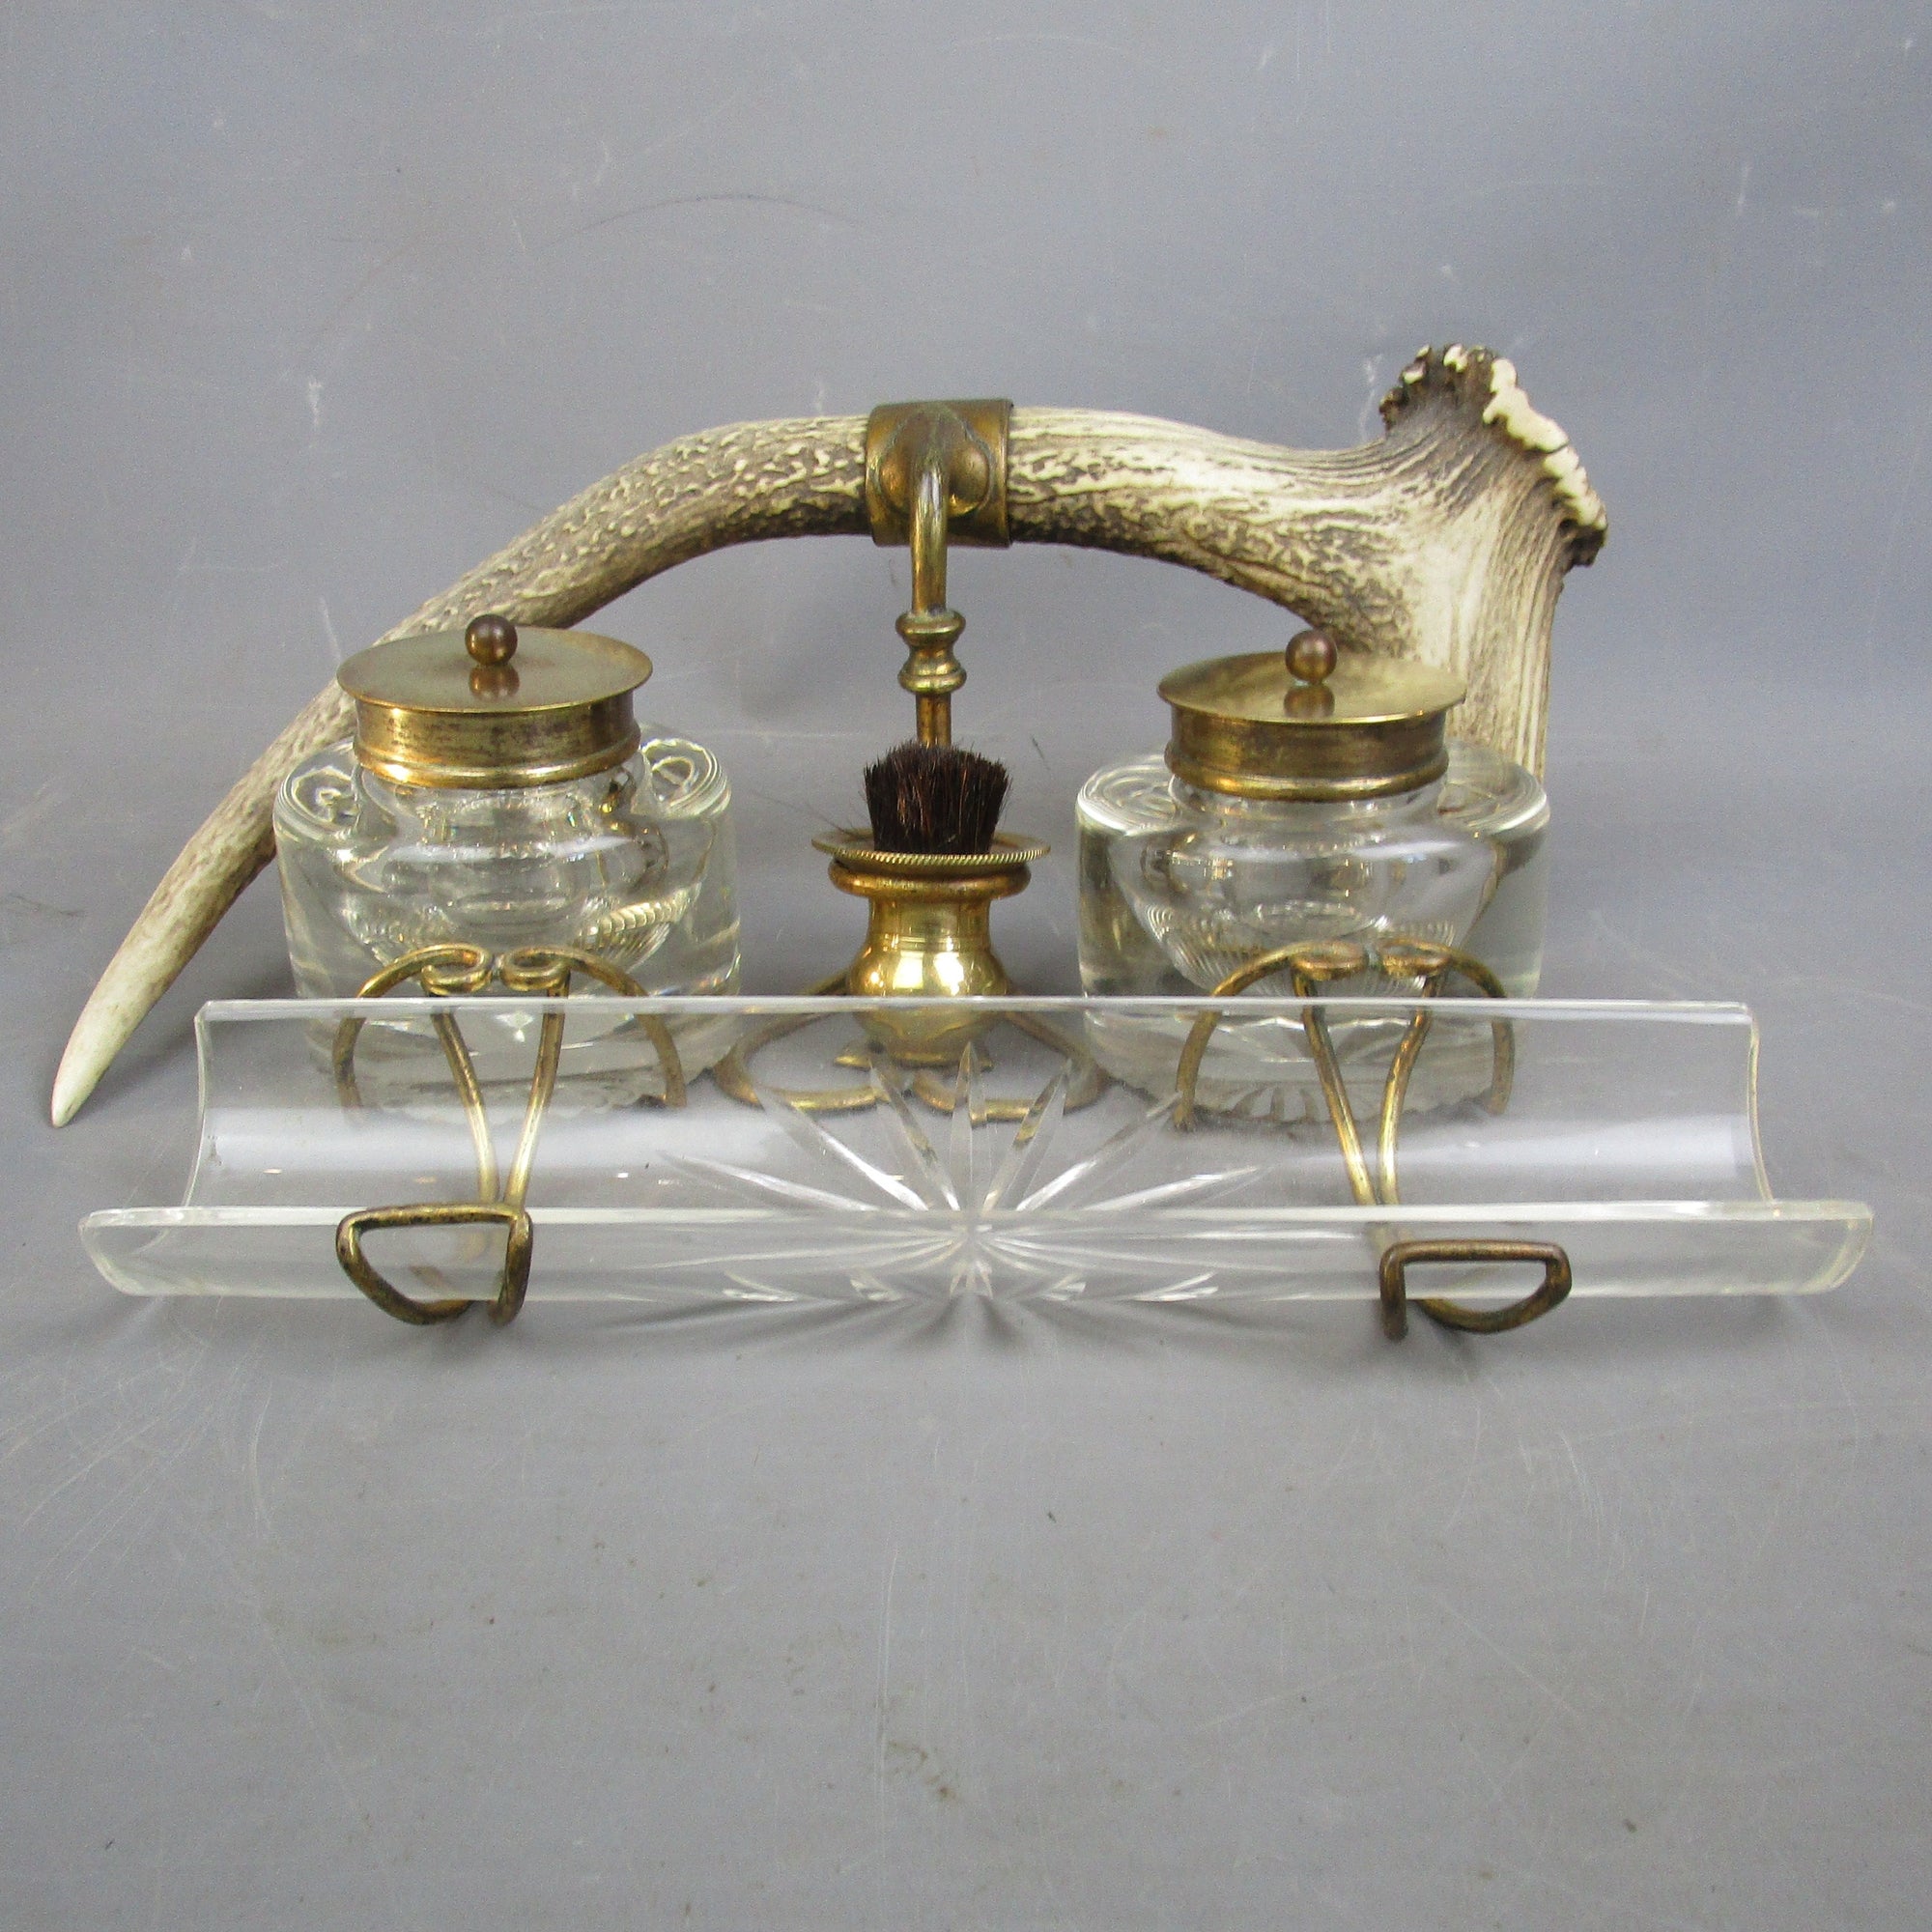 Small brass candle holder, c.1880 « Past Imperfect, The Art of